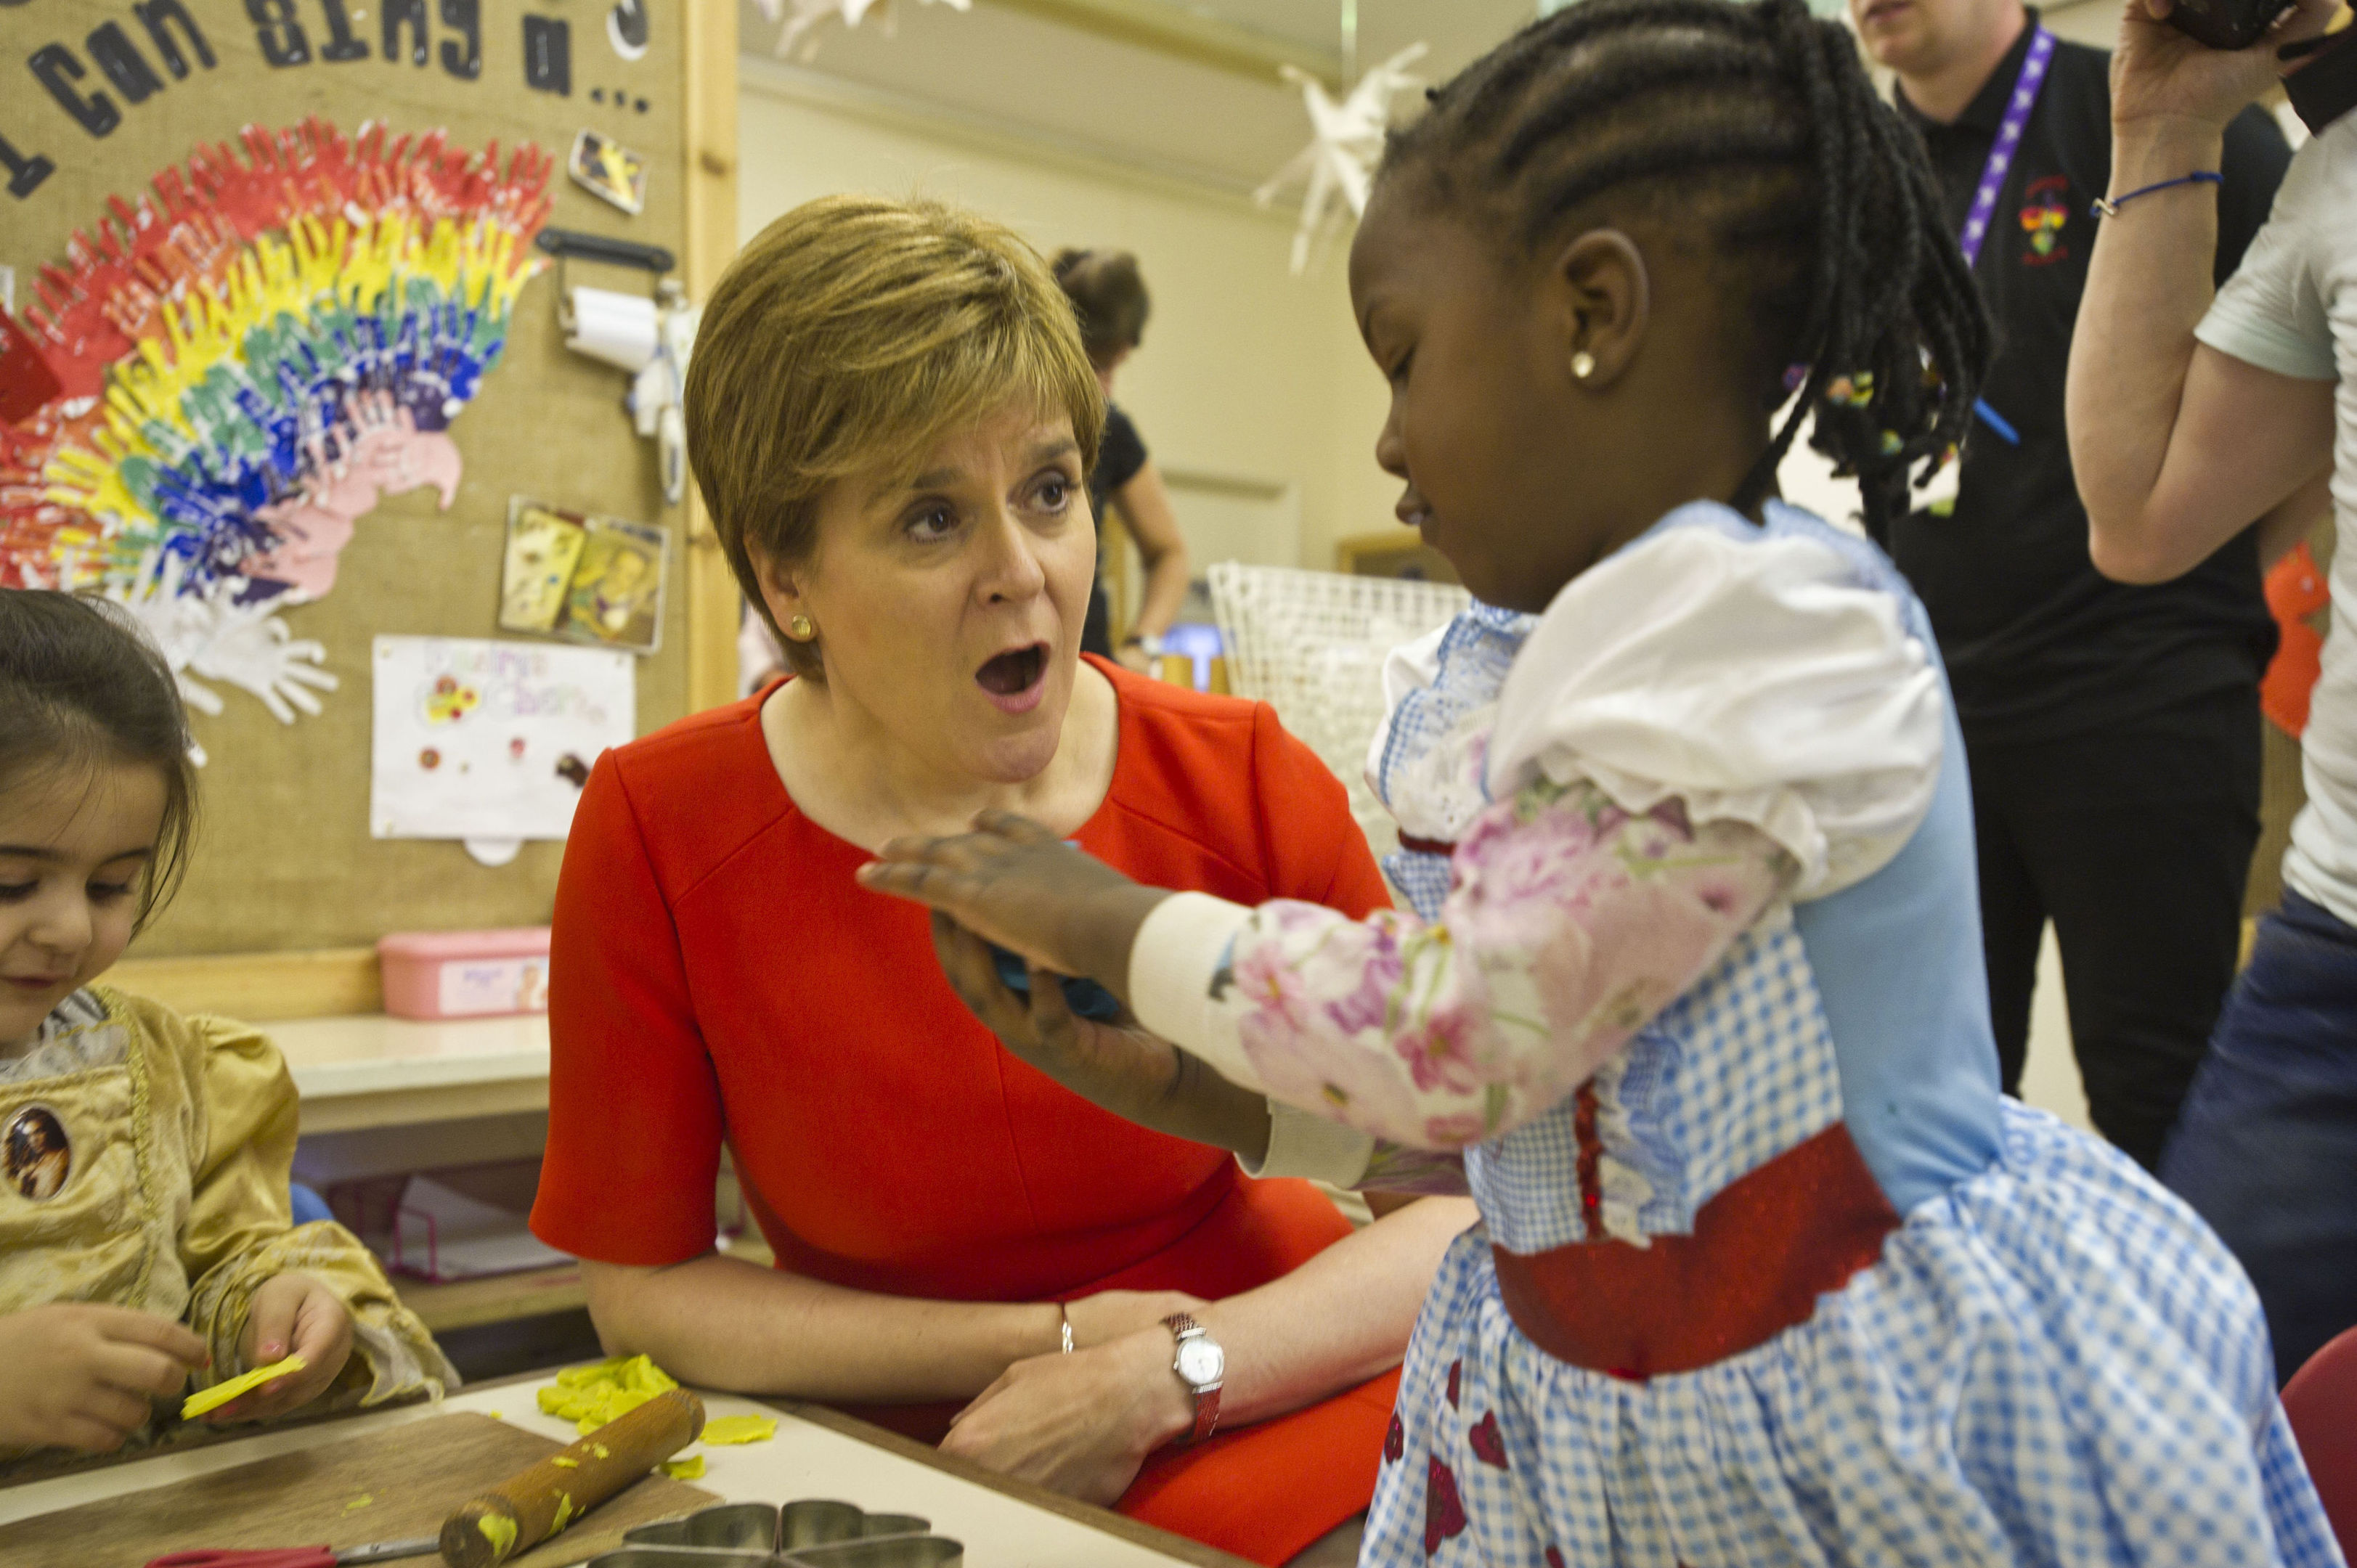 First Minister Nicola Sturgeon meets some of the children at the Butterfly Nursery in Arden, Glasgow (John Gunion/The Scottish Sun/PA Wire)